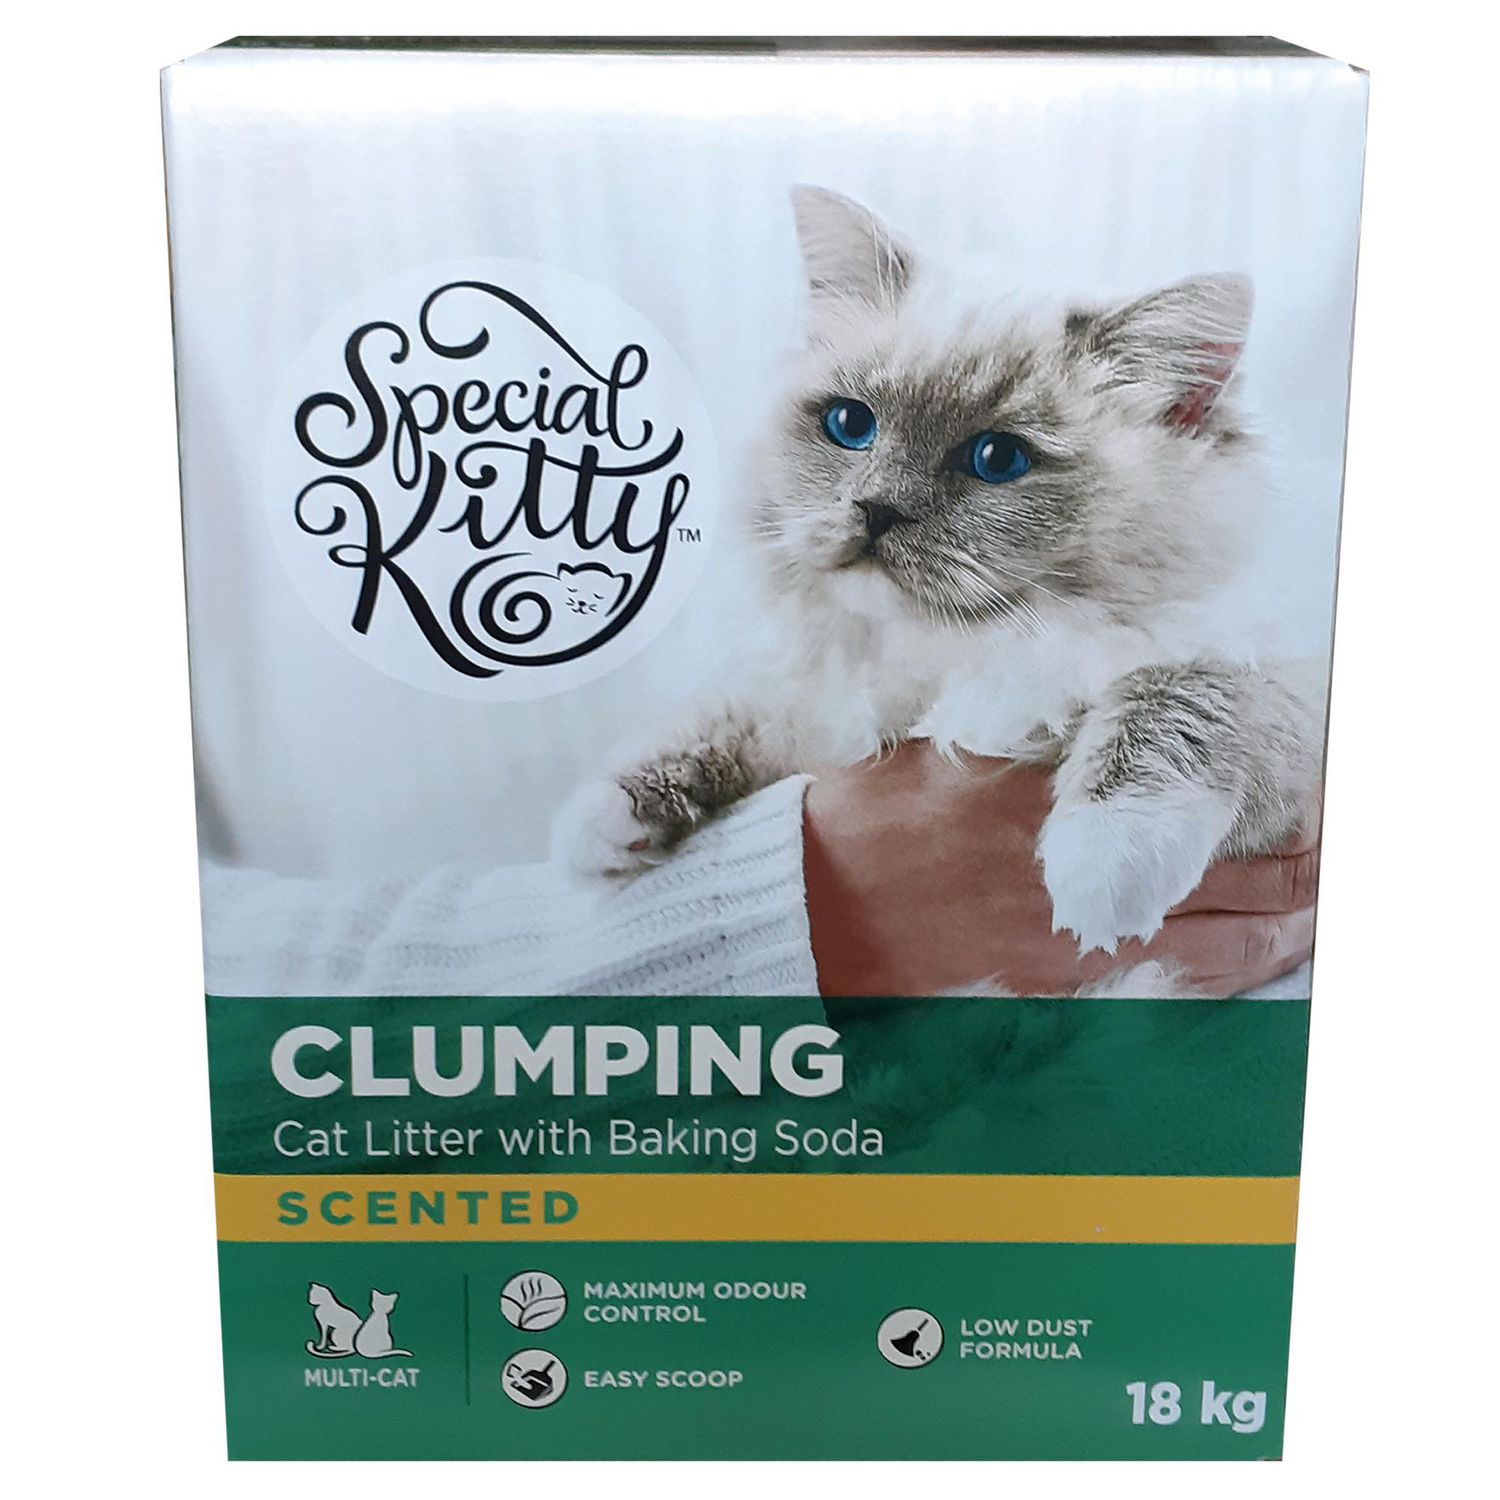 Special Kitty Clumping Cat Litter with Baking Soda, Scented Walmart Canada